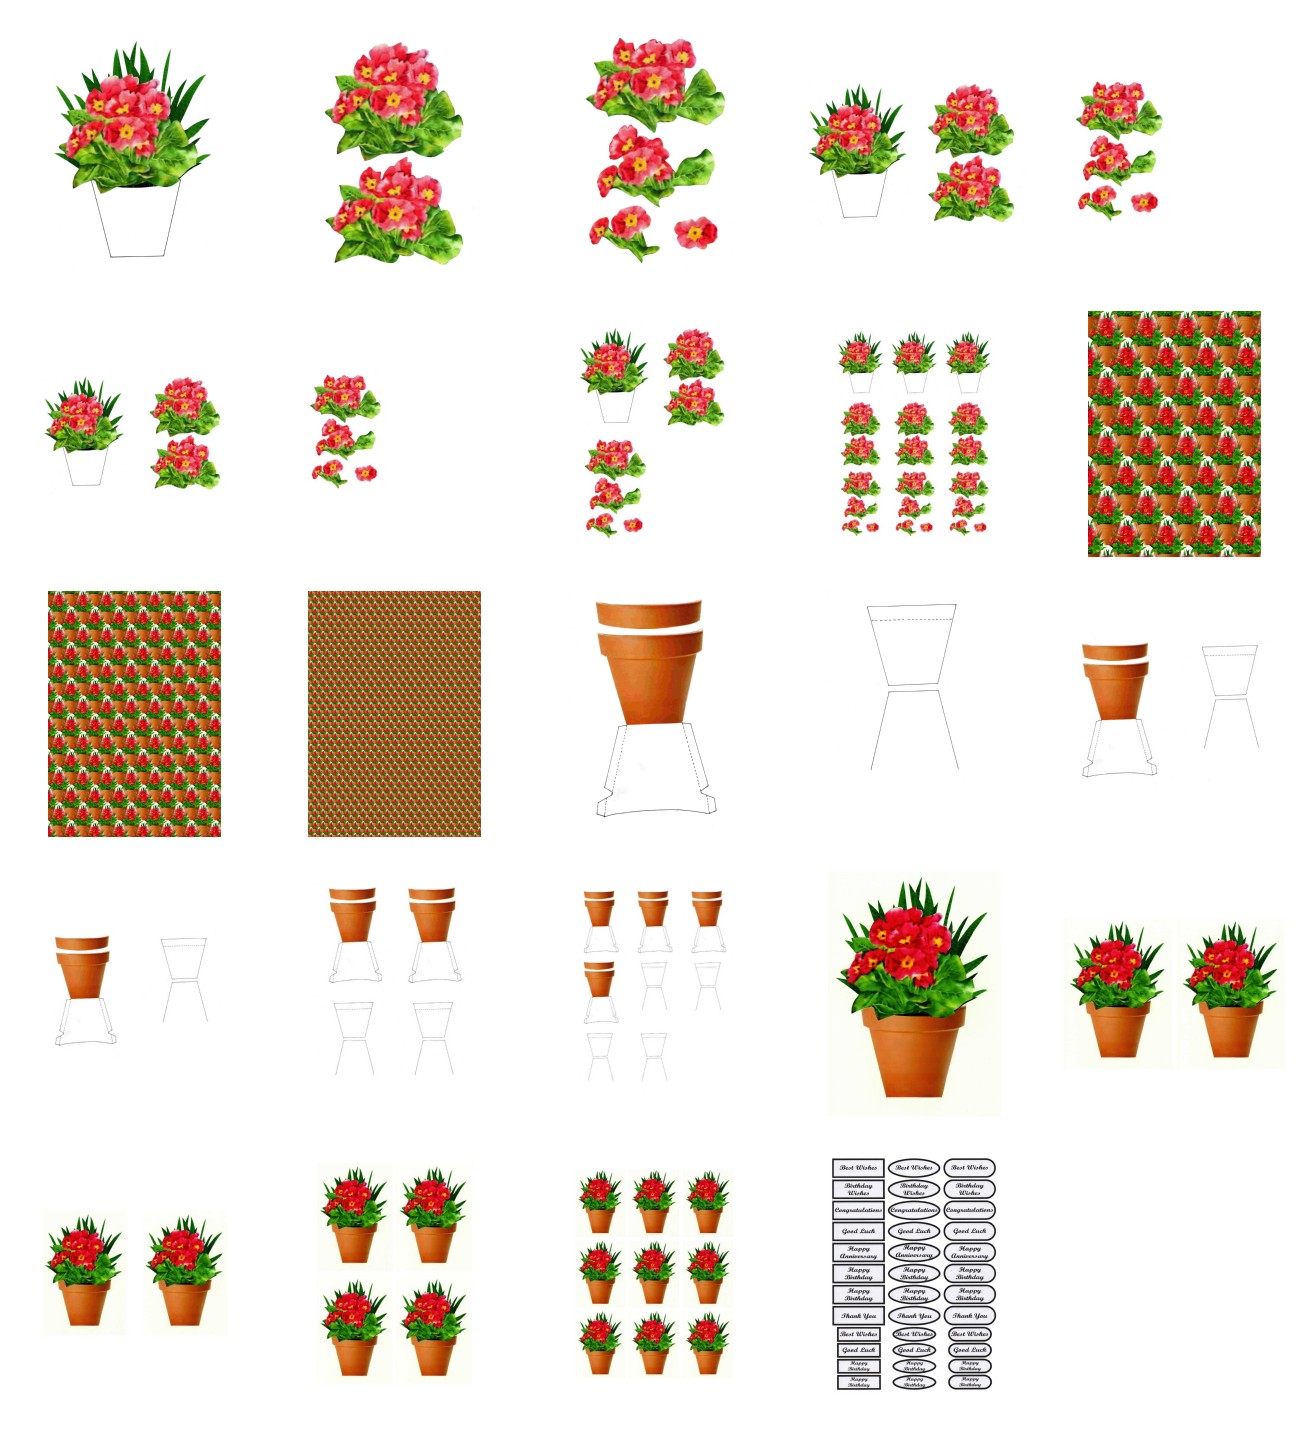 Spring Polyanthus Flowers - 25 Pages to Download